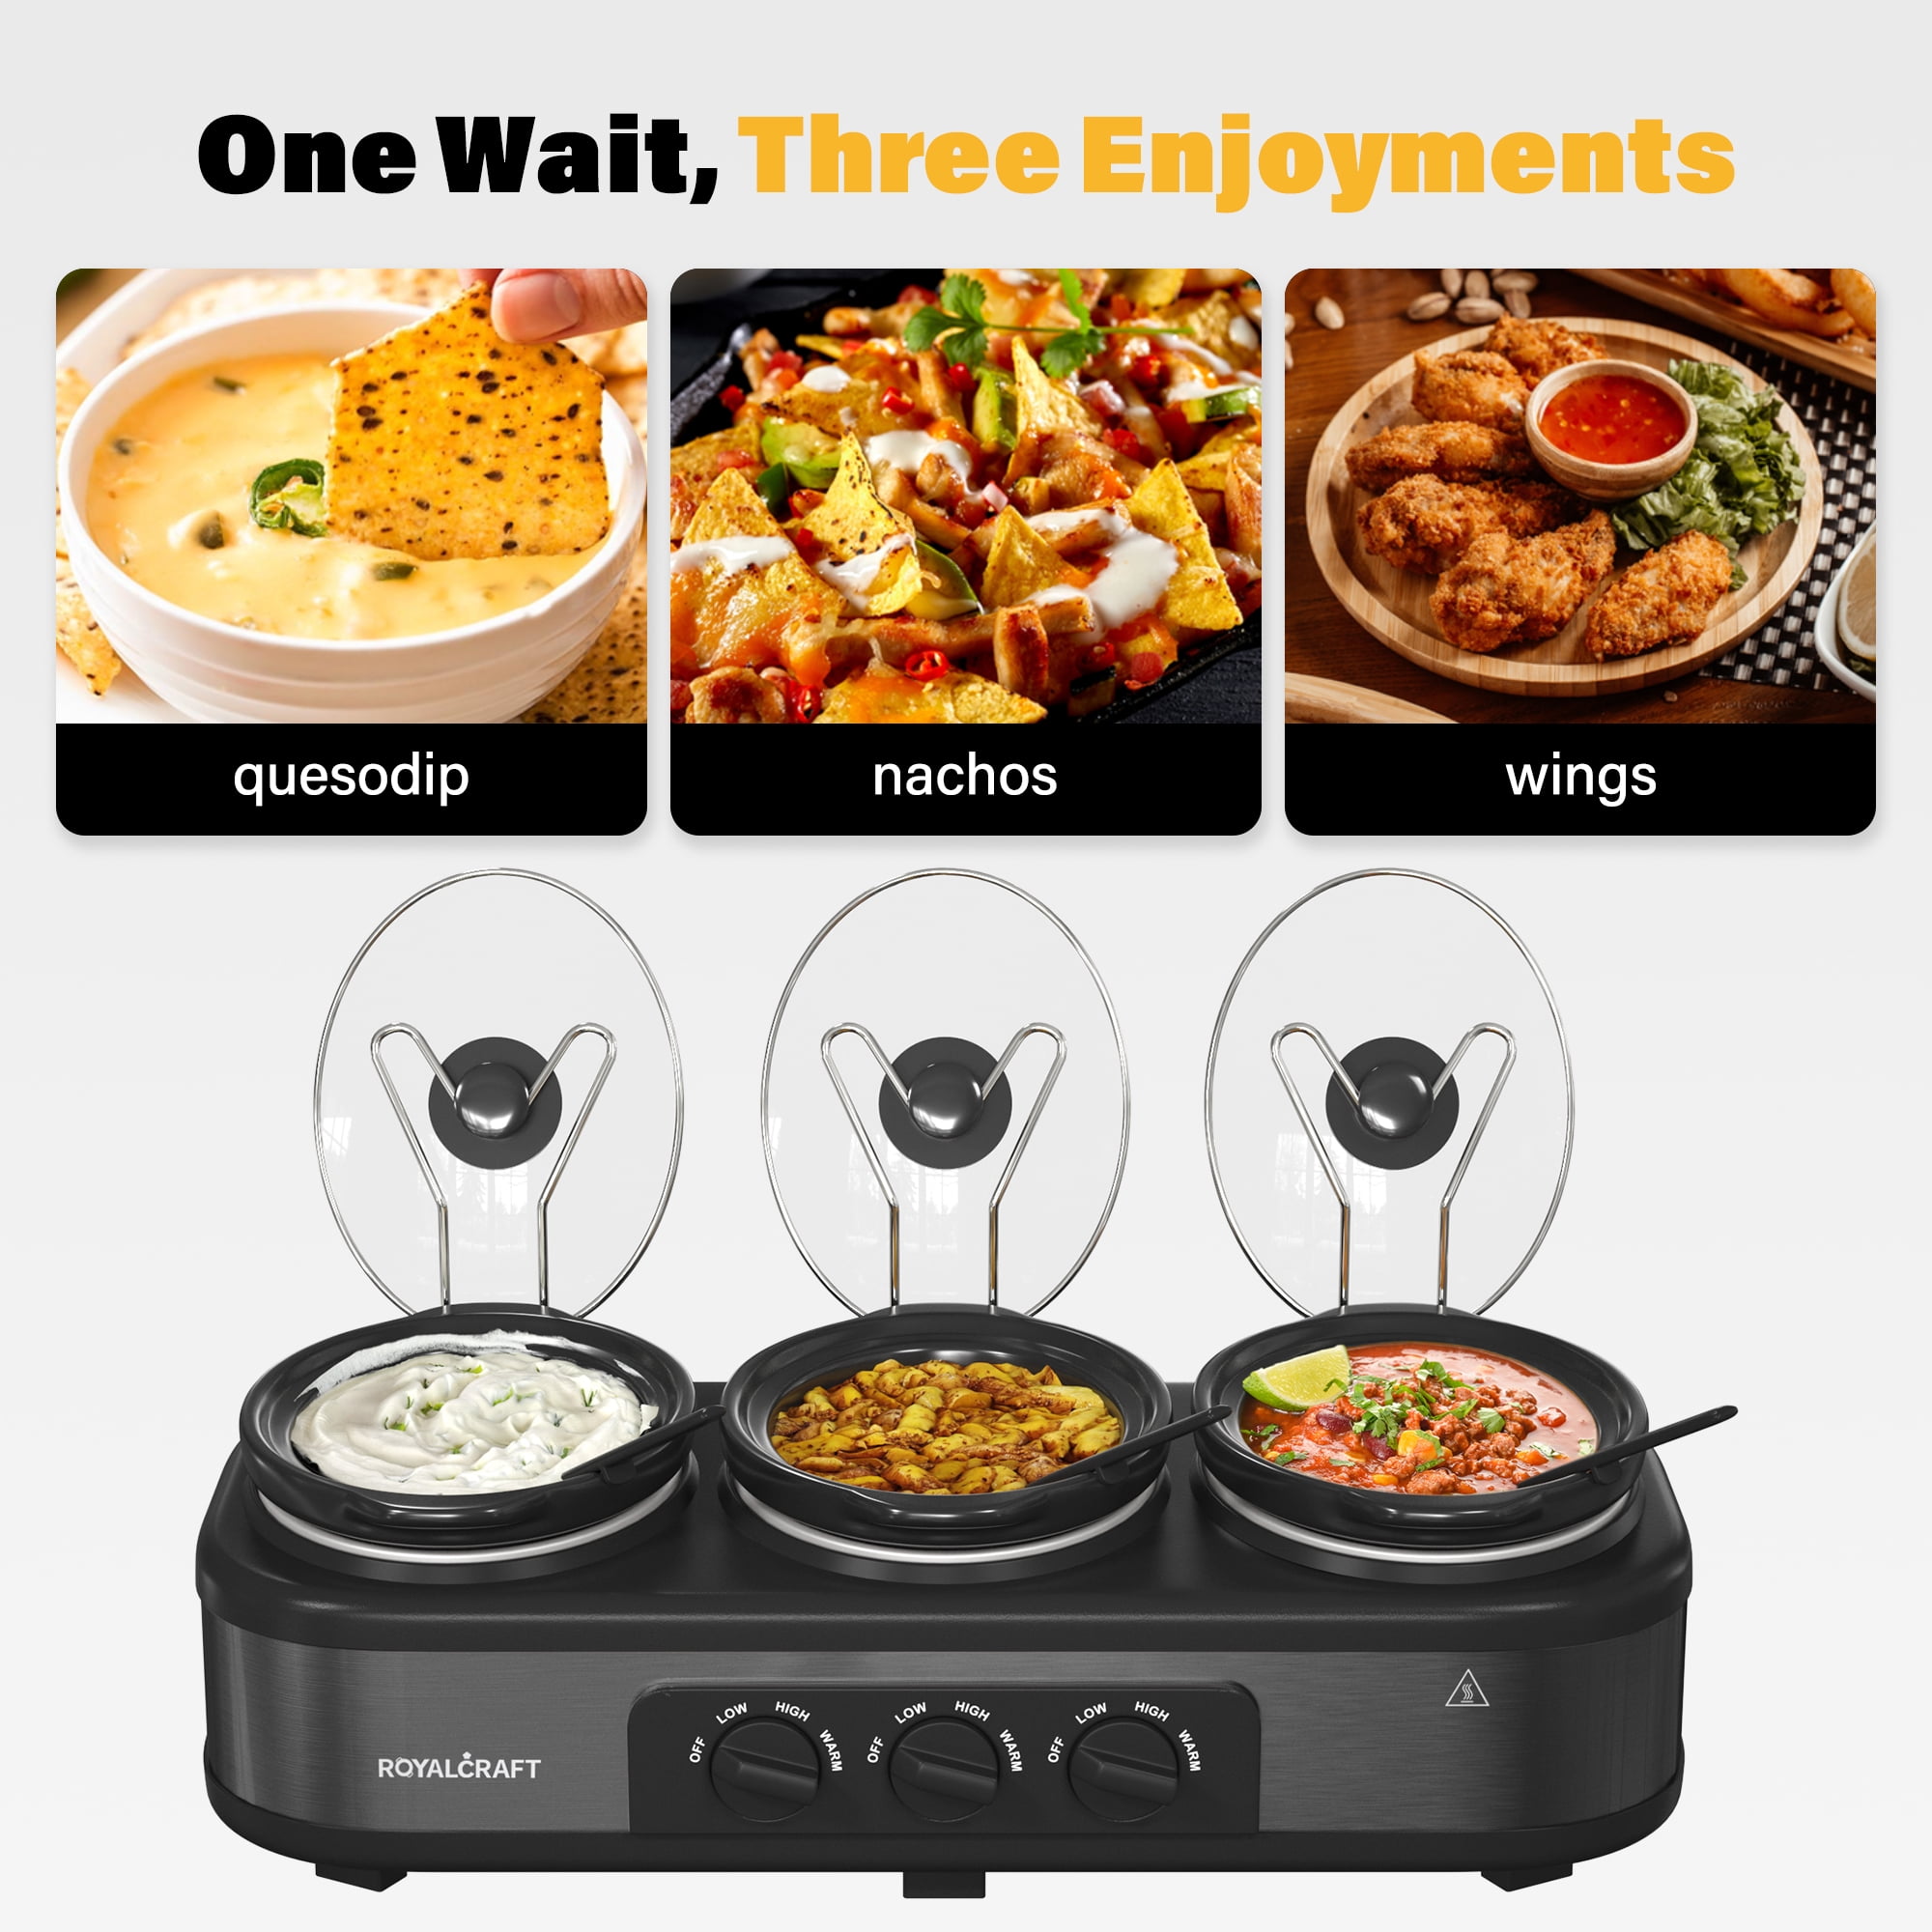 SUNVIVI Small Slow Cooker Triple Food Warmer Buffet Servers with 3 Ceramic  Pot 1.5 Quart Crock, Perfect for Parties, Entertaining & Holidays 